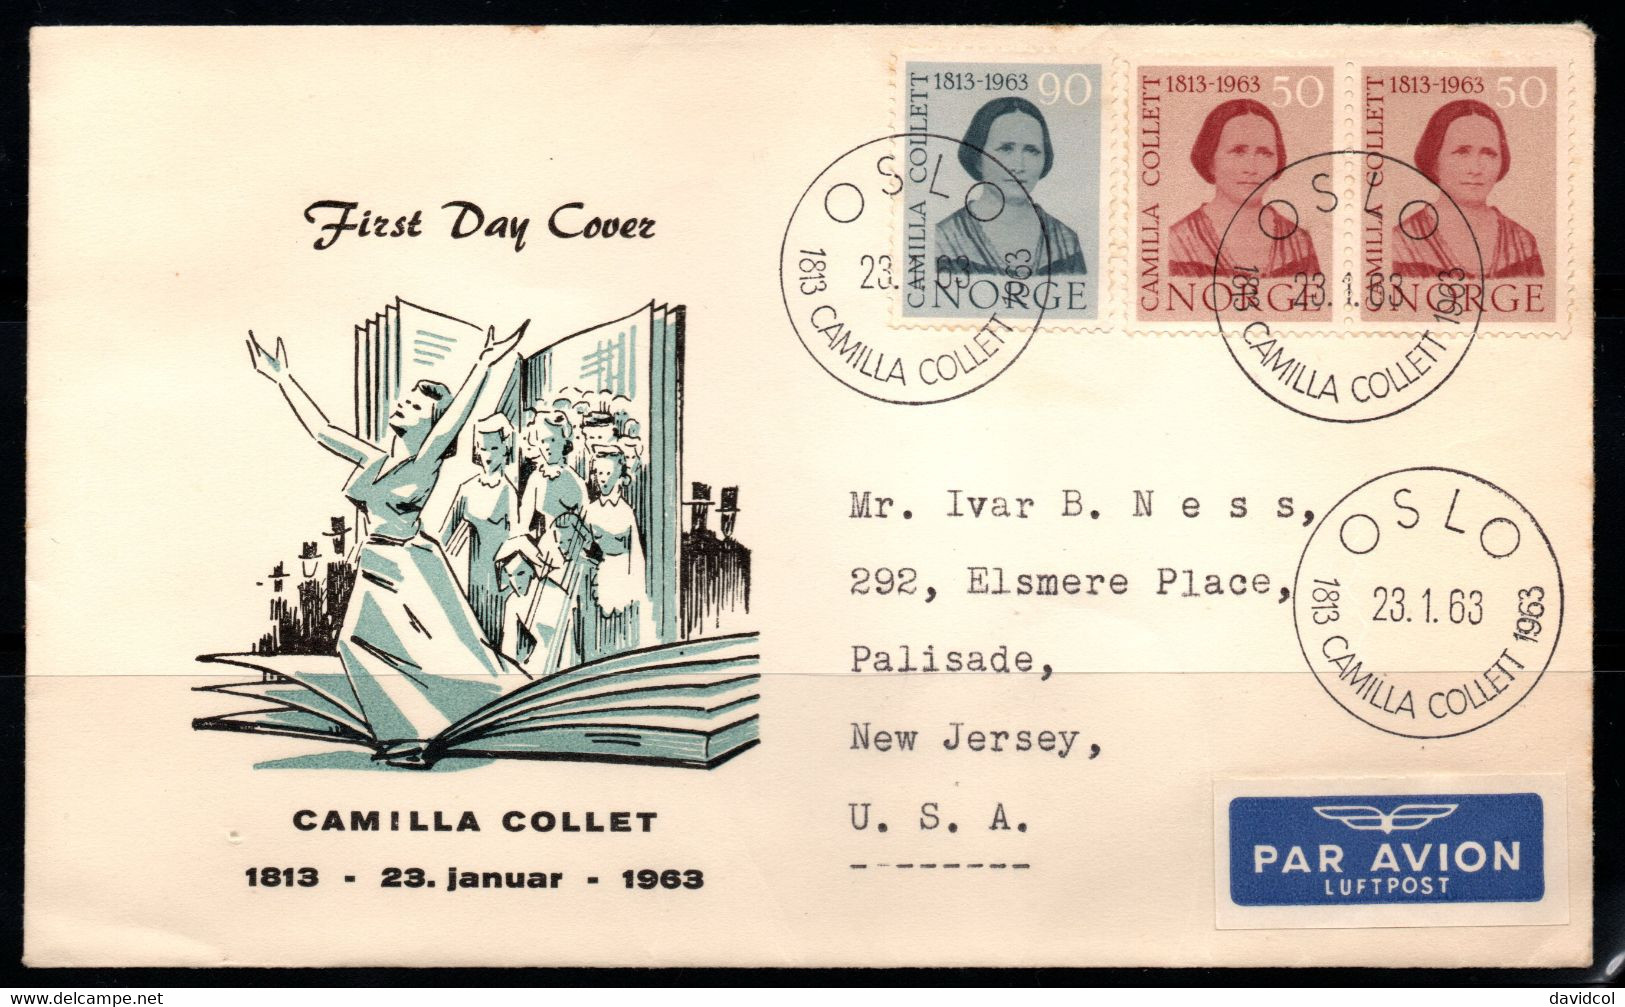 CA180- COVERAUCTION!!! - NORWAY 1963 - OSLO 23-1-63- CAMILLA COLLECT - AUTHOR - Lettres & Documents